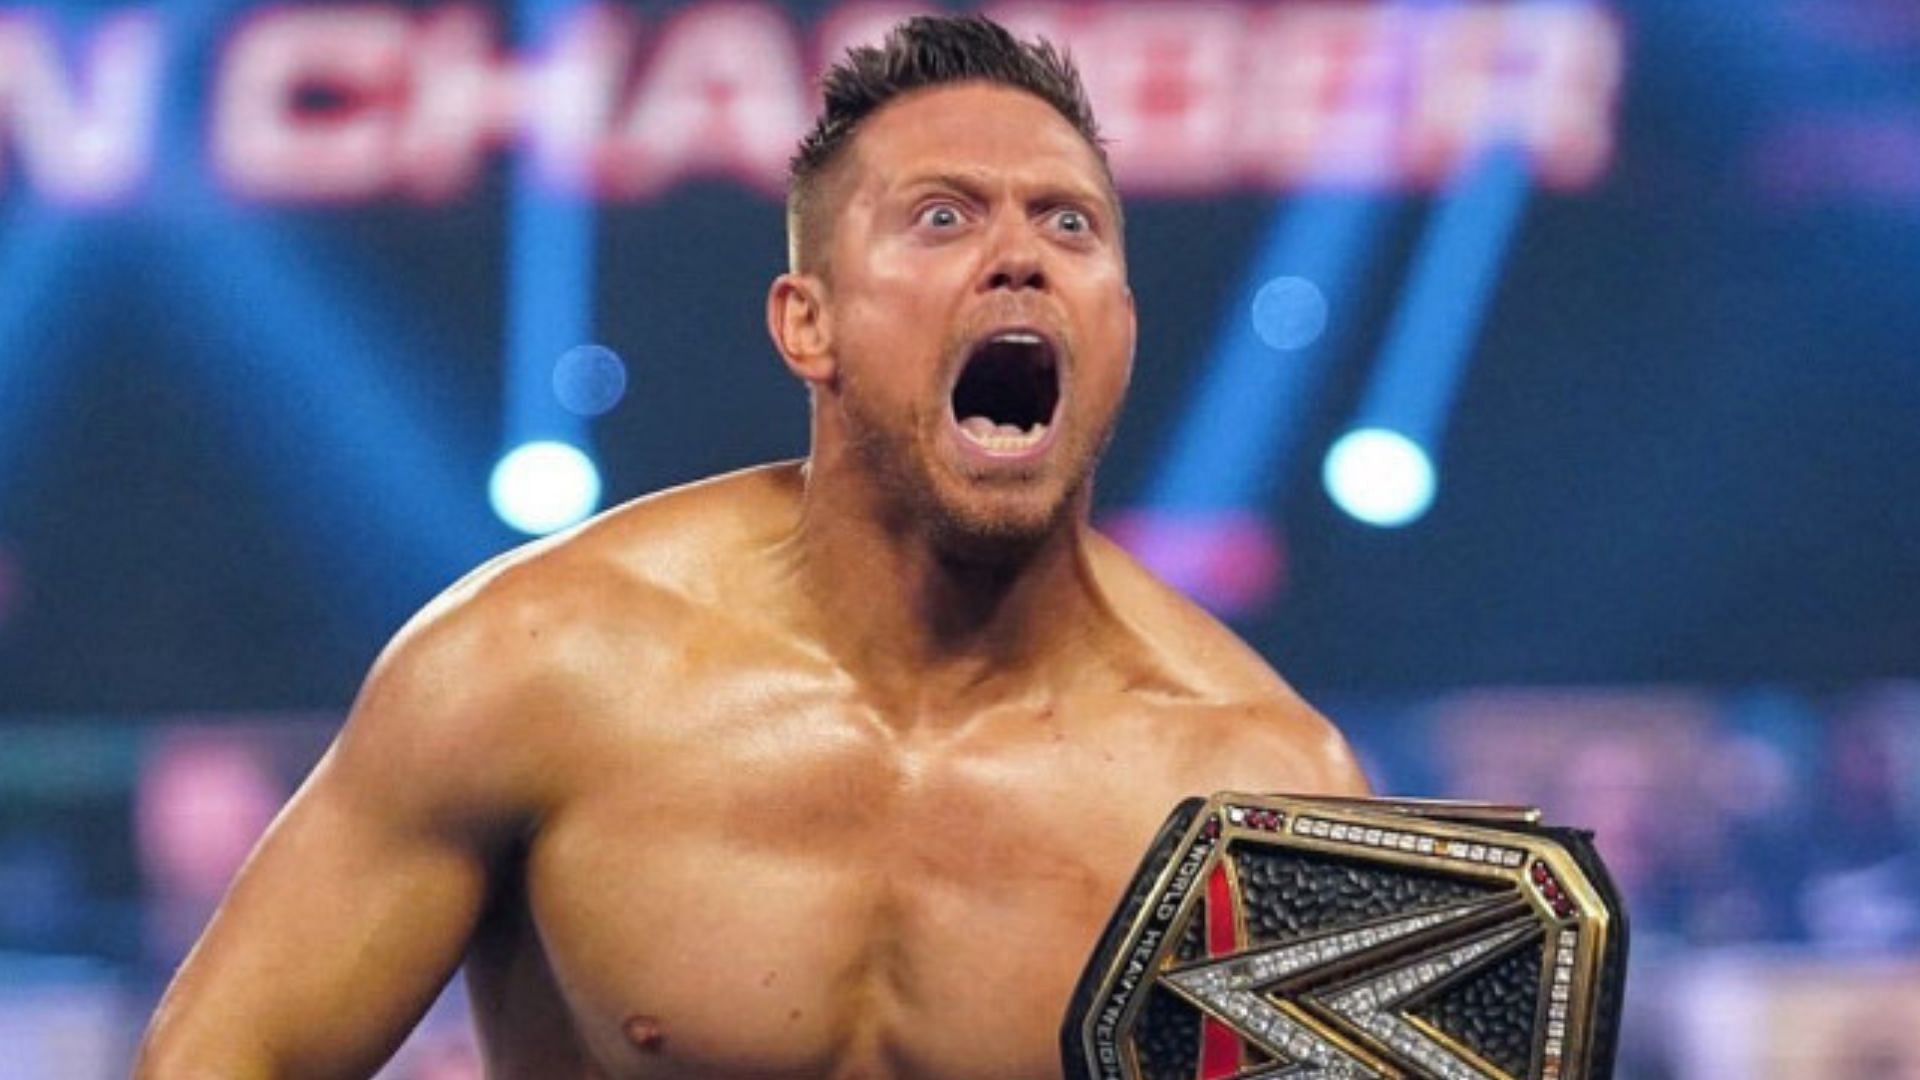 Who should be the final opponent for The Miz?